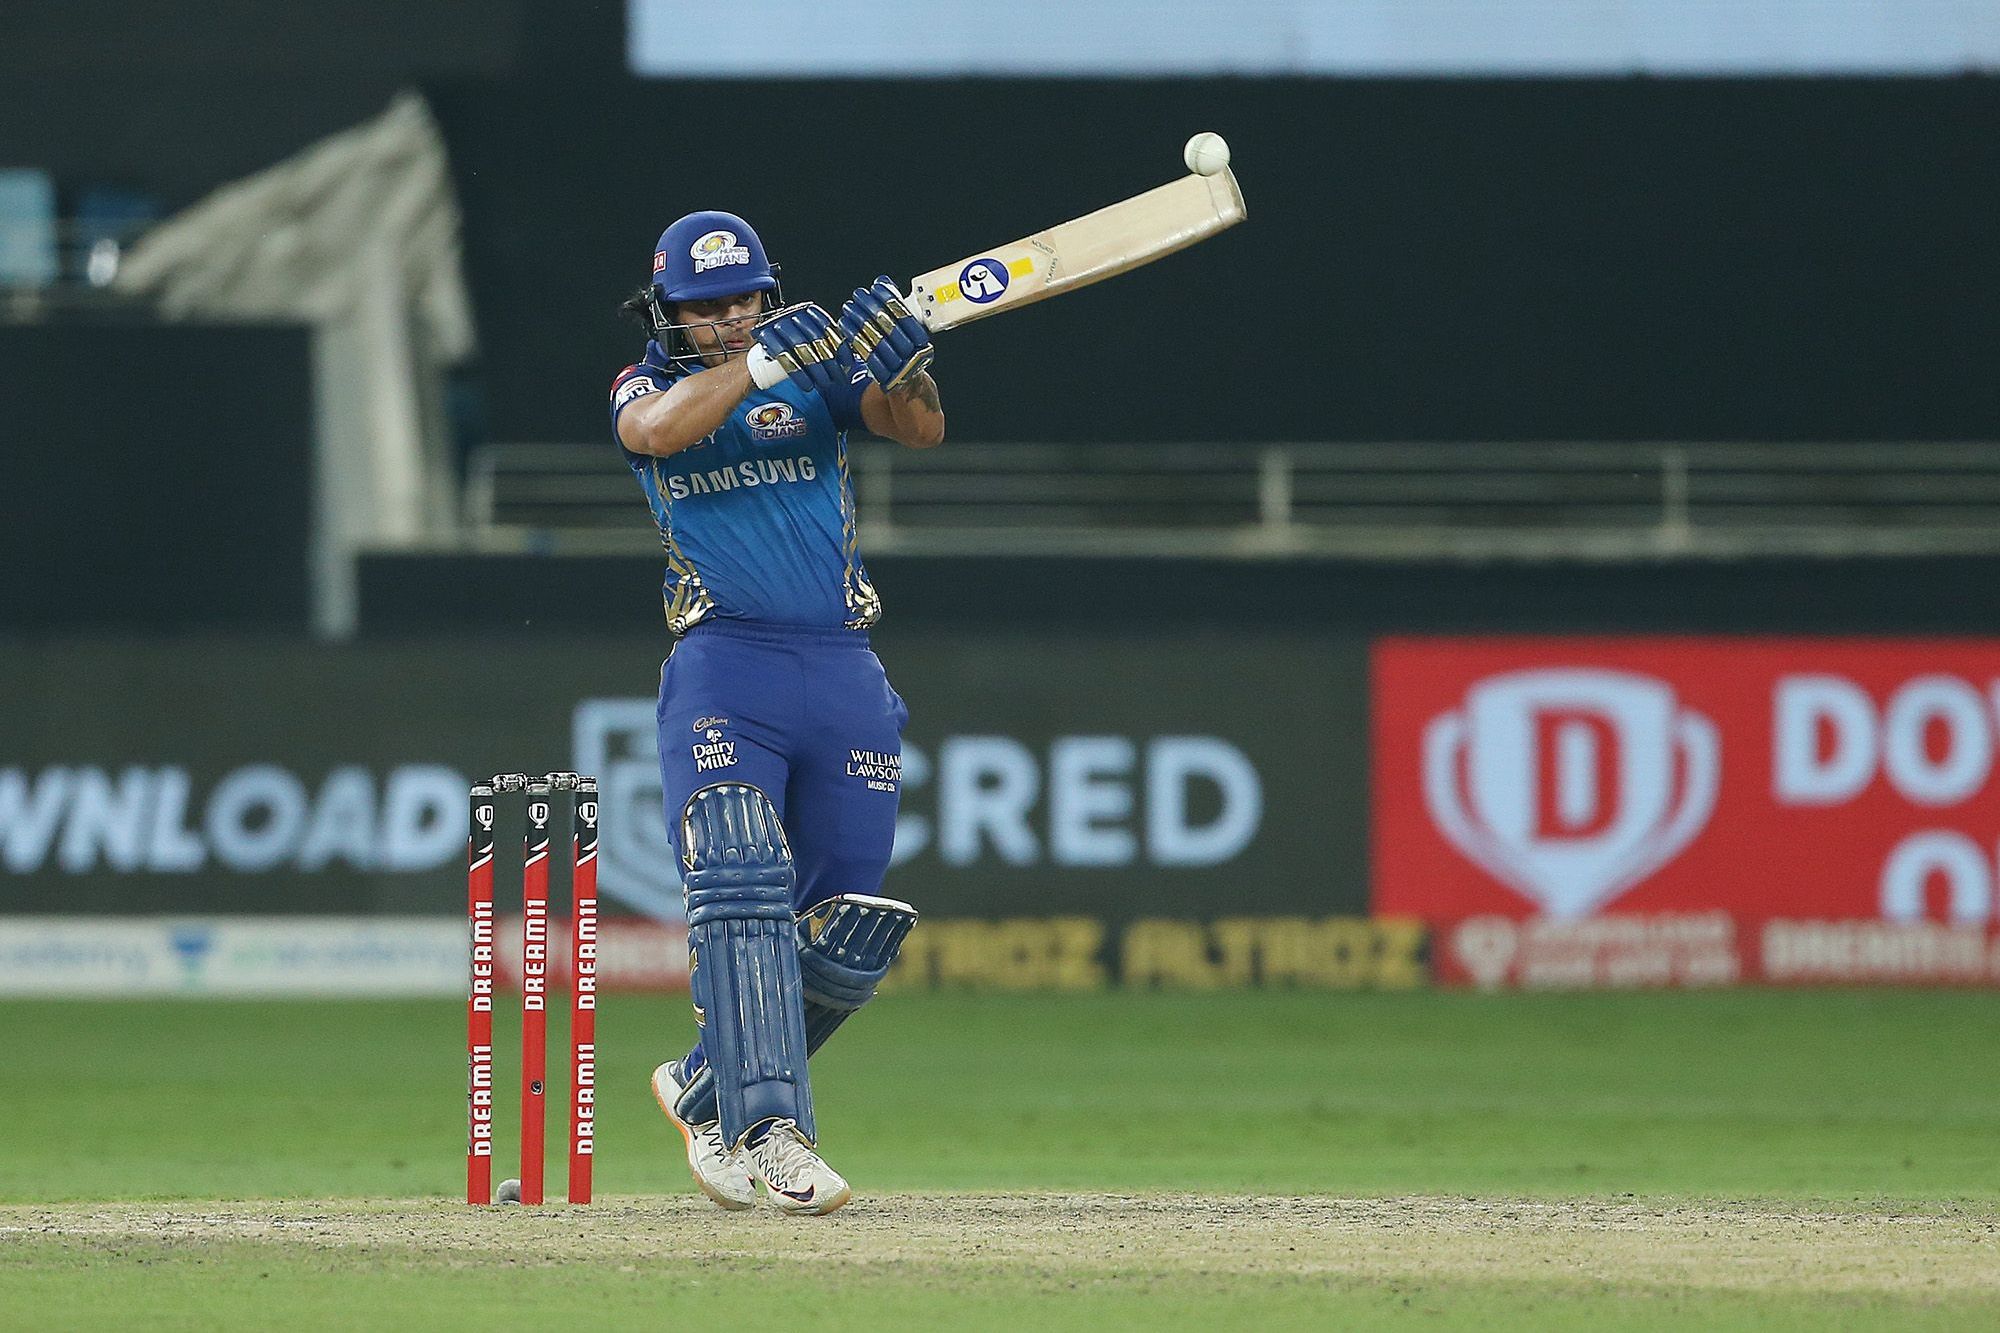 Ishan Kishan set the IPL on fire with his aggressive batting and hit 30 sixes | BCCI/IPL